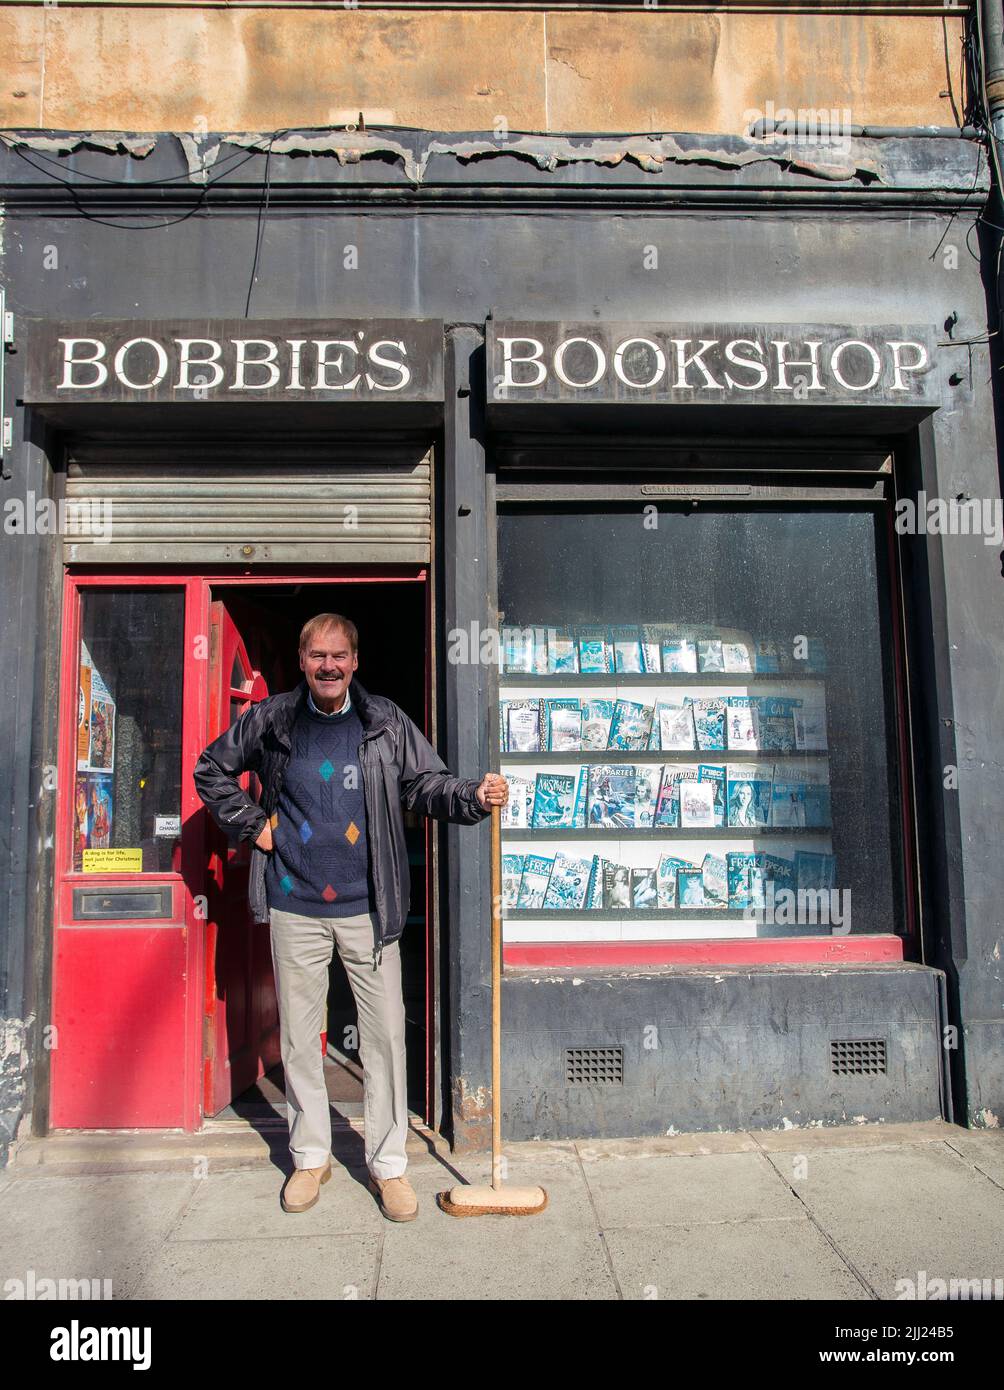 Bookseller standing with broom outside bookshop Stock Photo